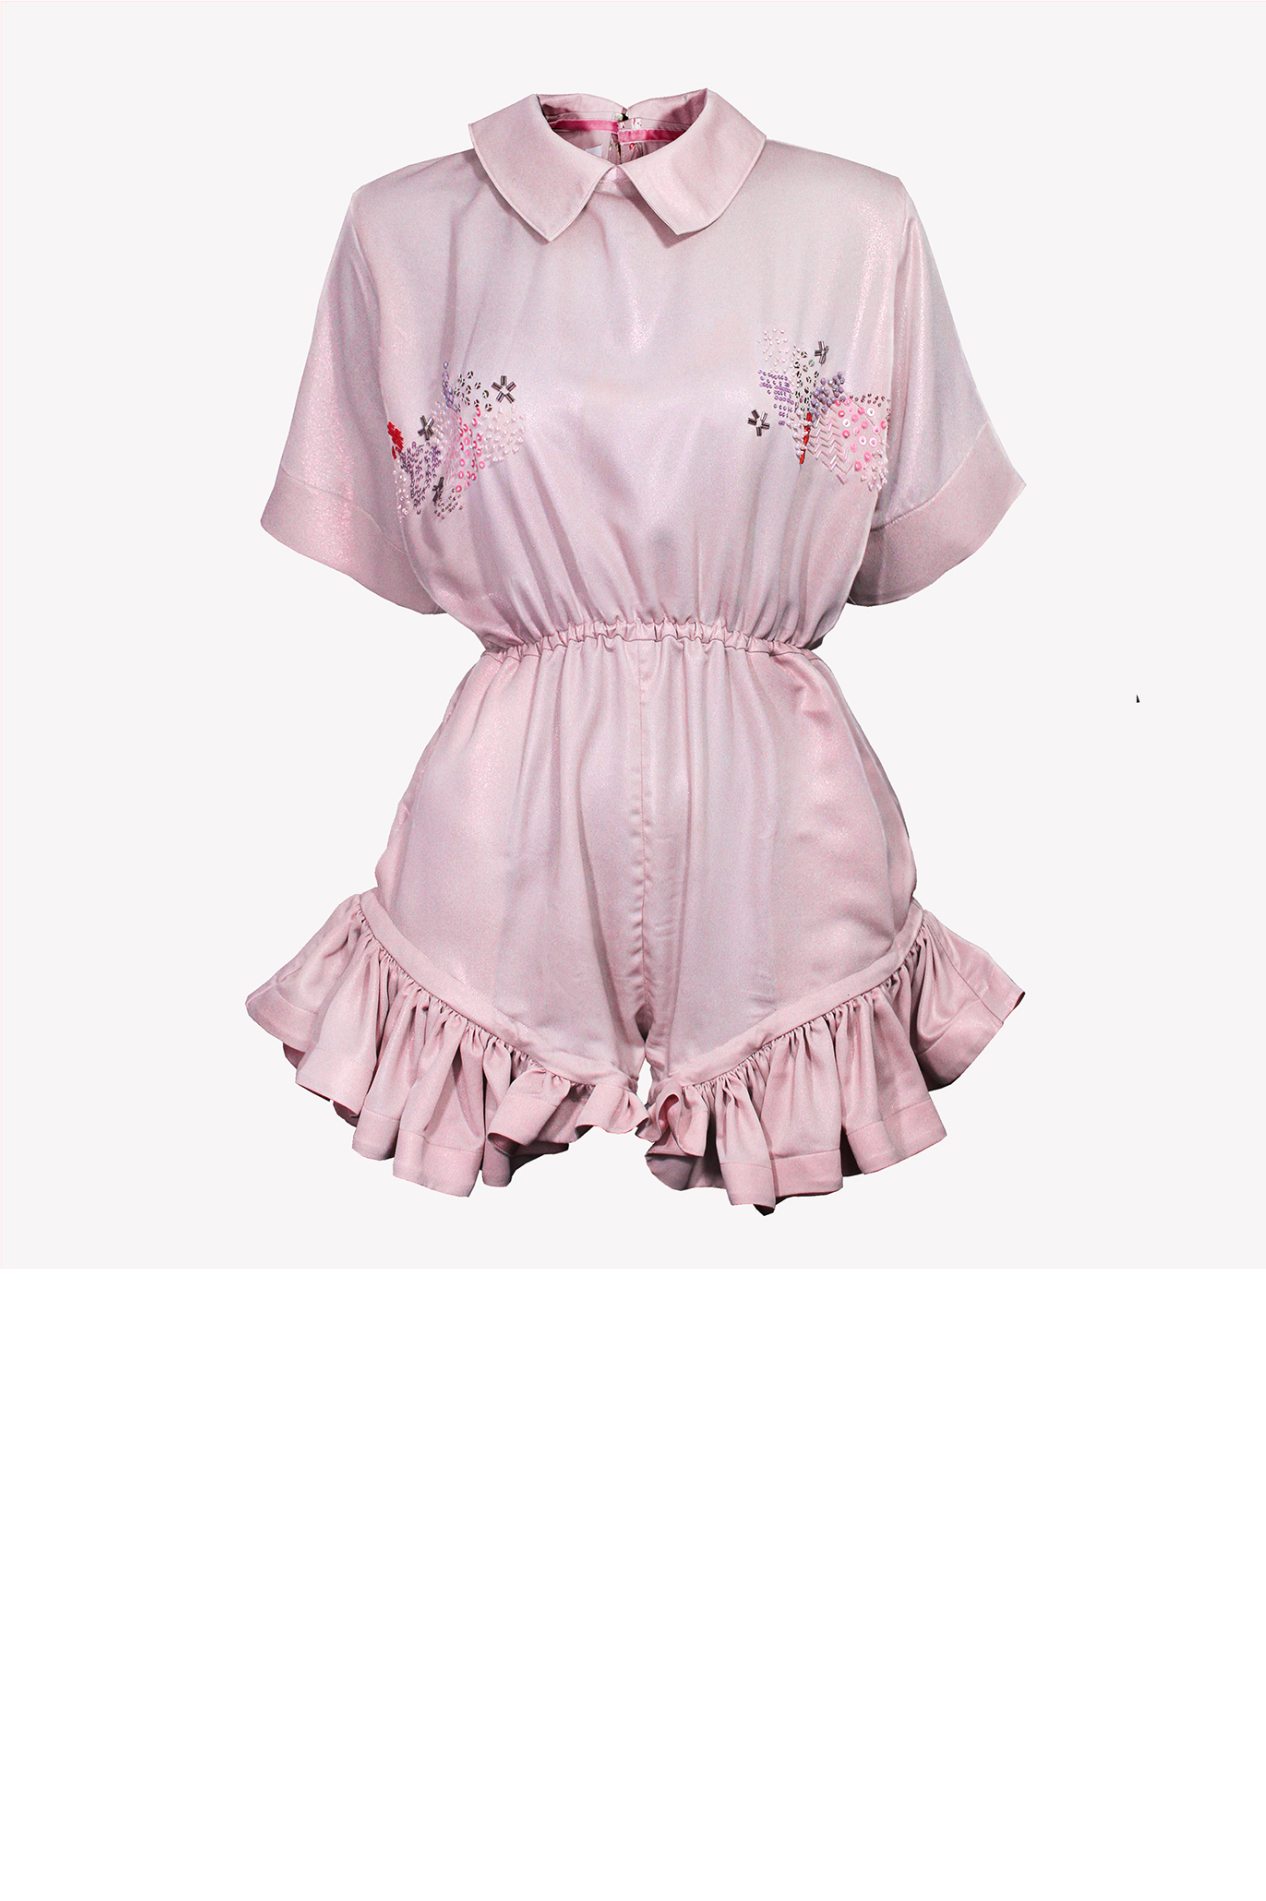 Pink playsuit with collar and colorful embroidery